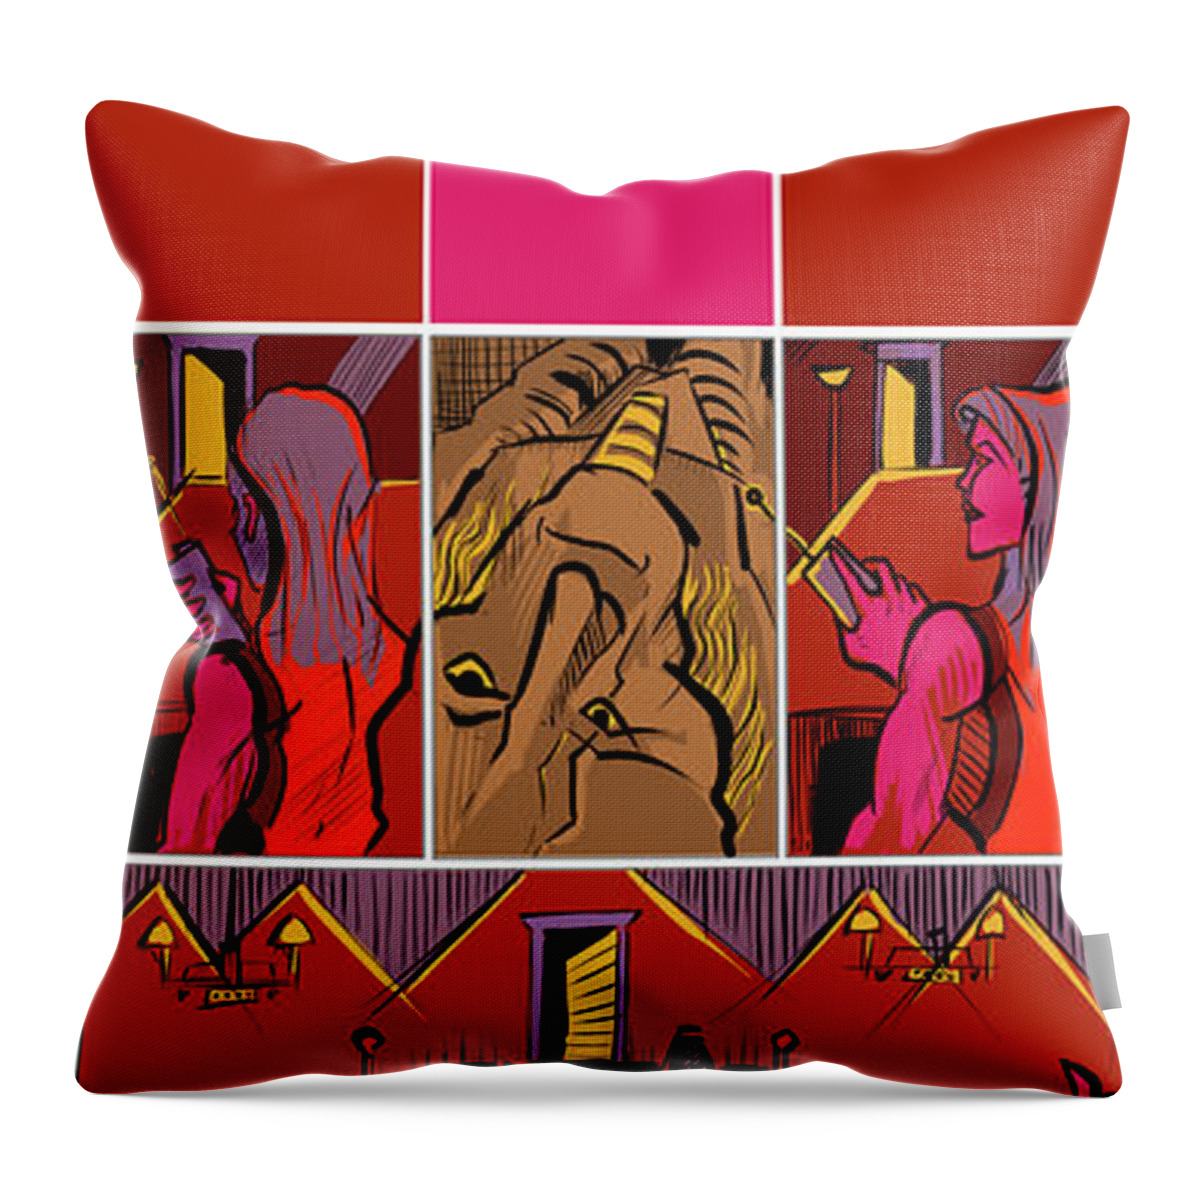  Throw Pillow featuring the painting First Immortal by John Gholson